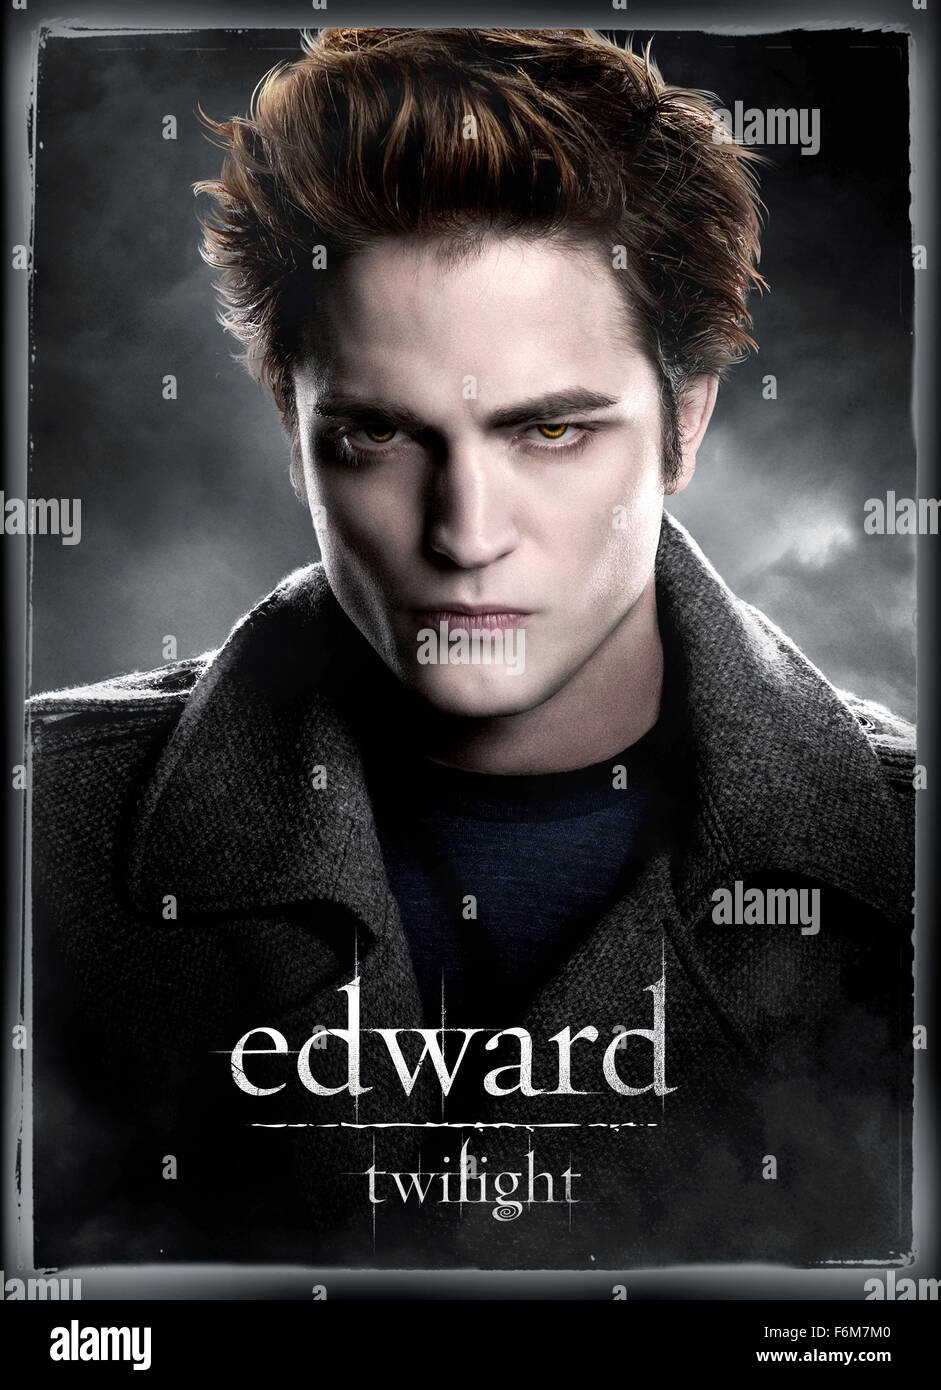 Incredible Collection of Full 4K Edward Cullen Images - Over 999+